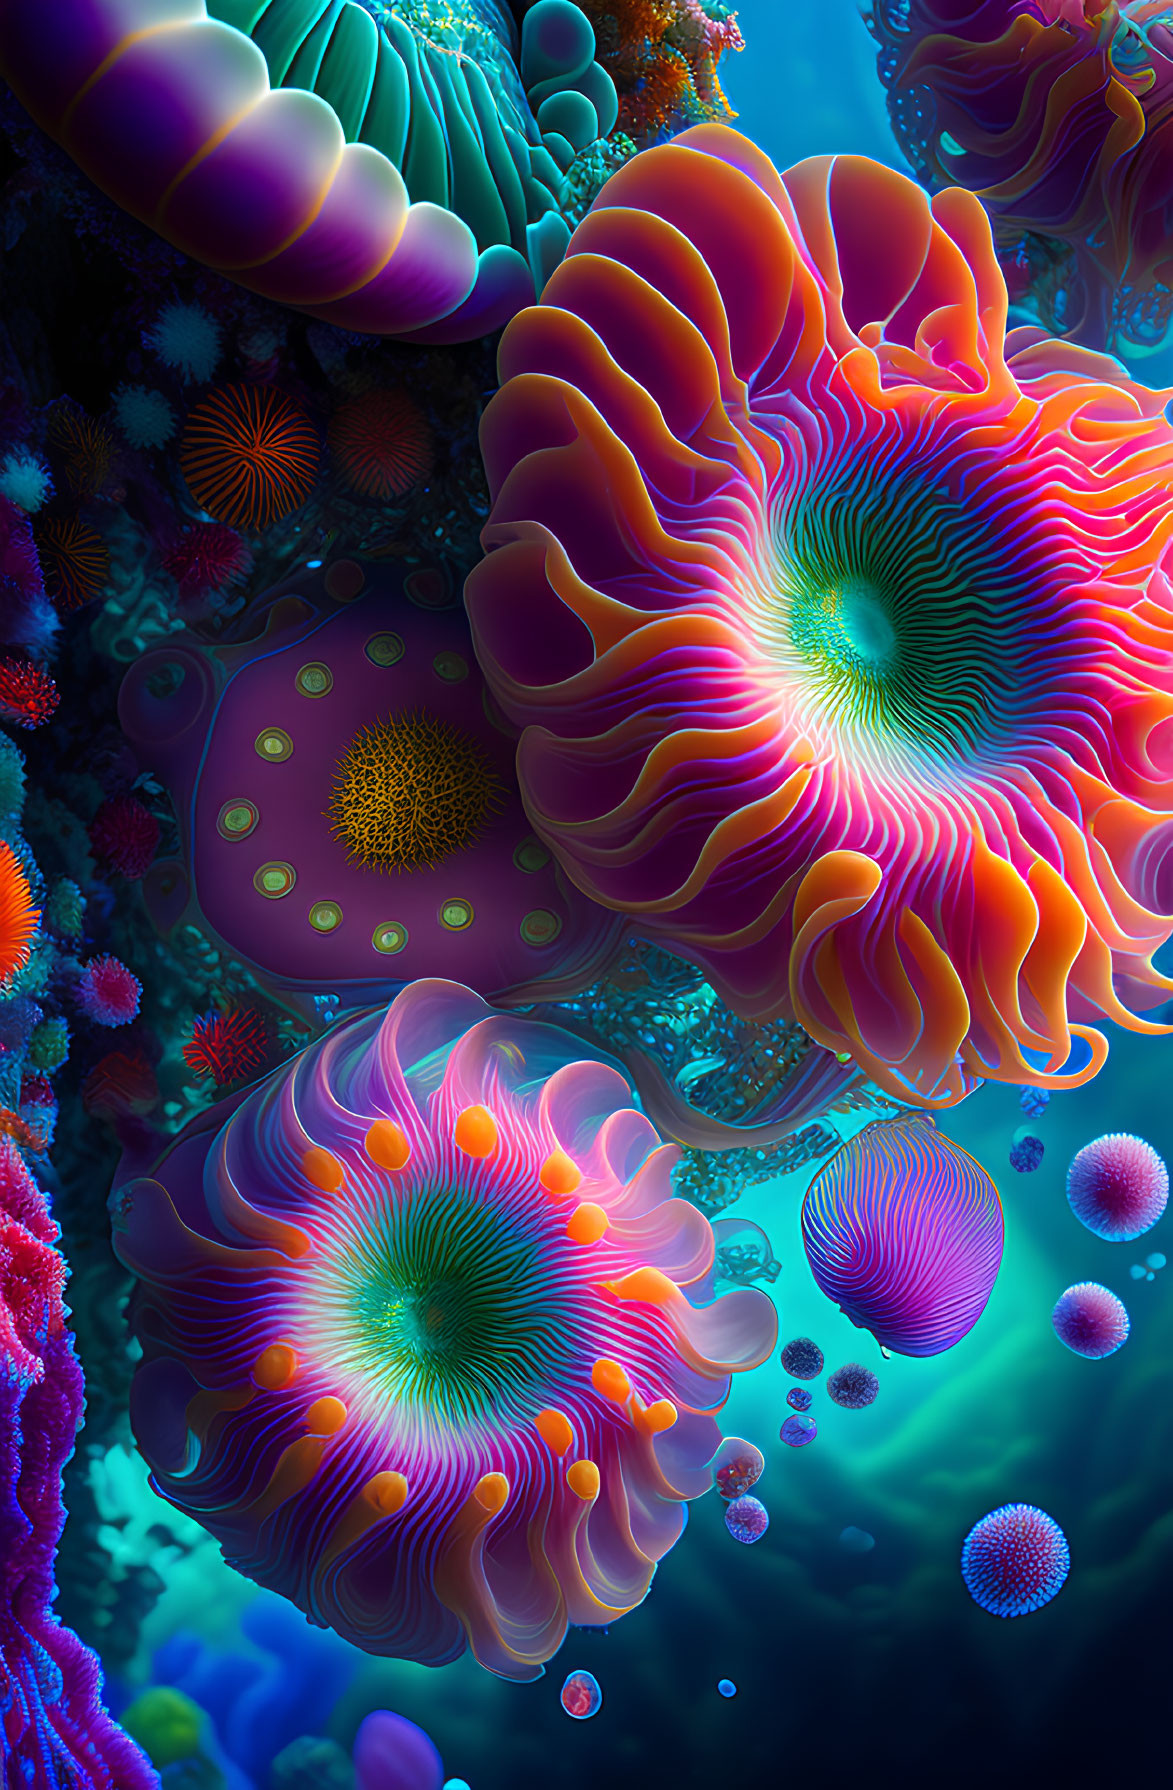 Colorful Underwater Digital Art with Jellyfish and Coral Structures